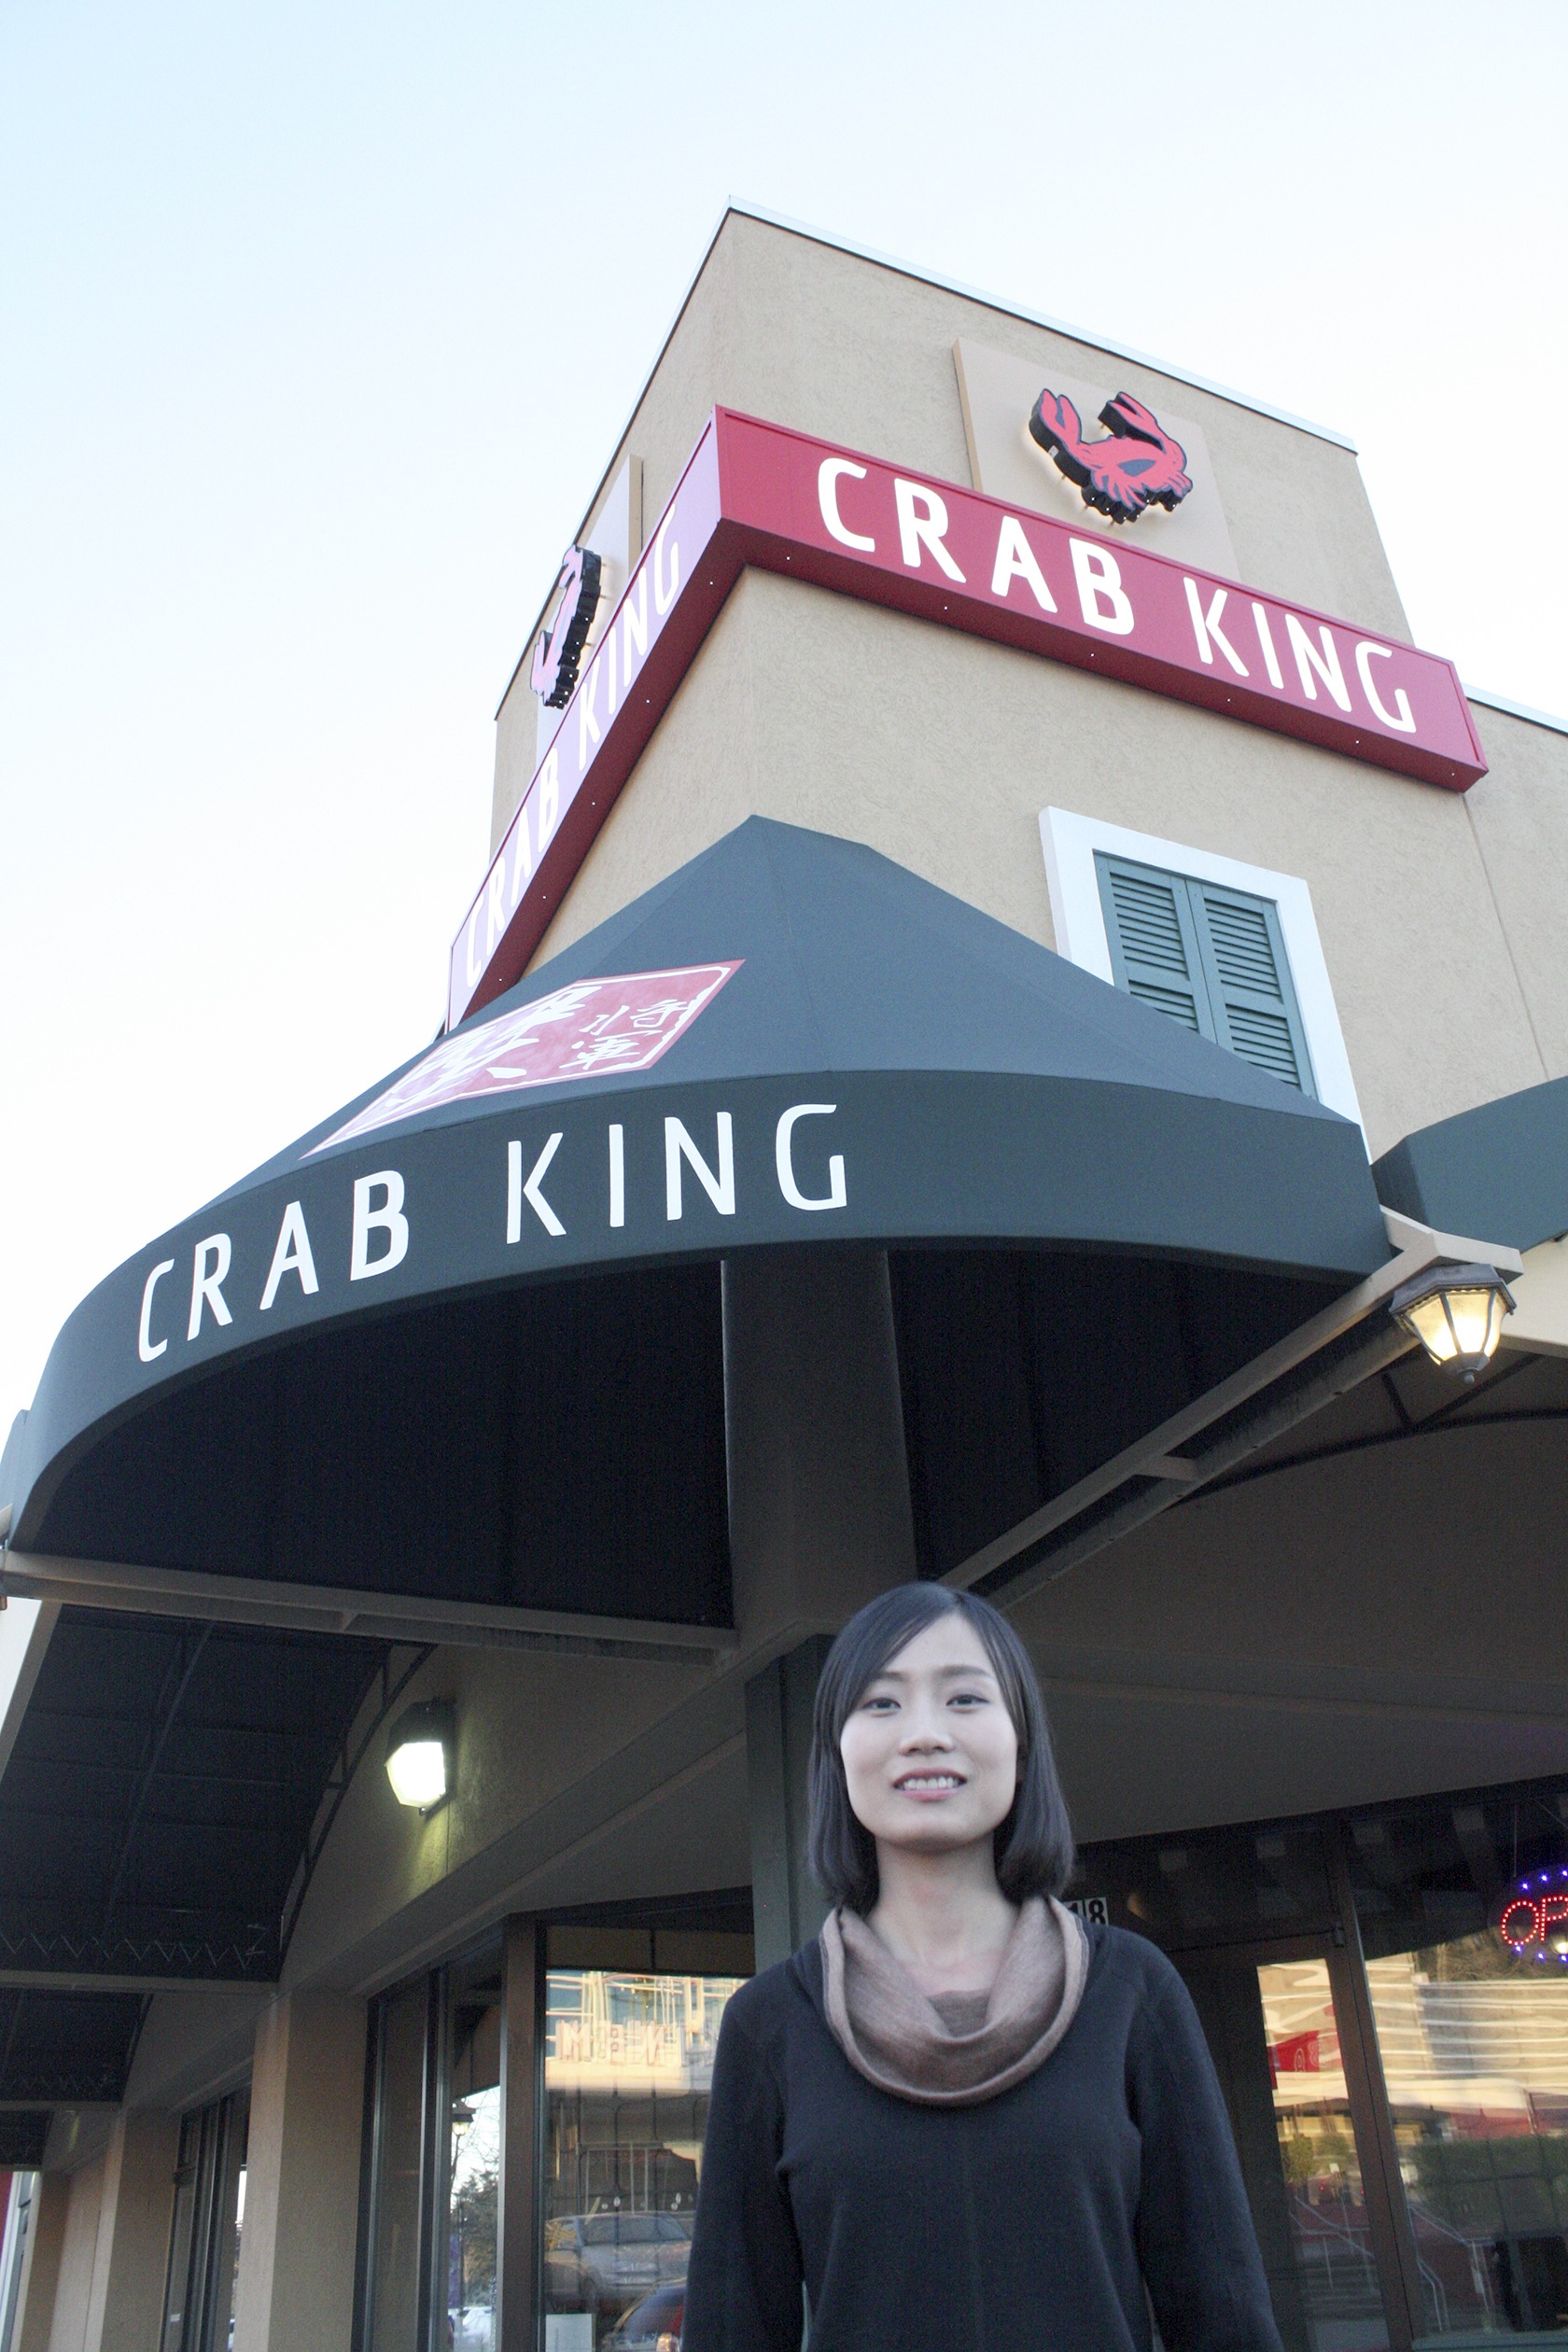 Crab King brings high-end seafood to Crossroads